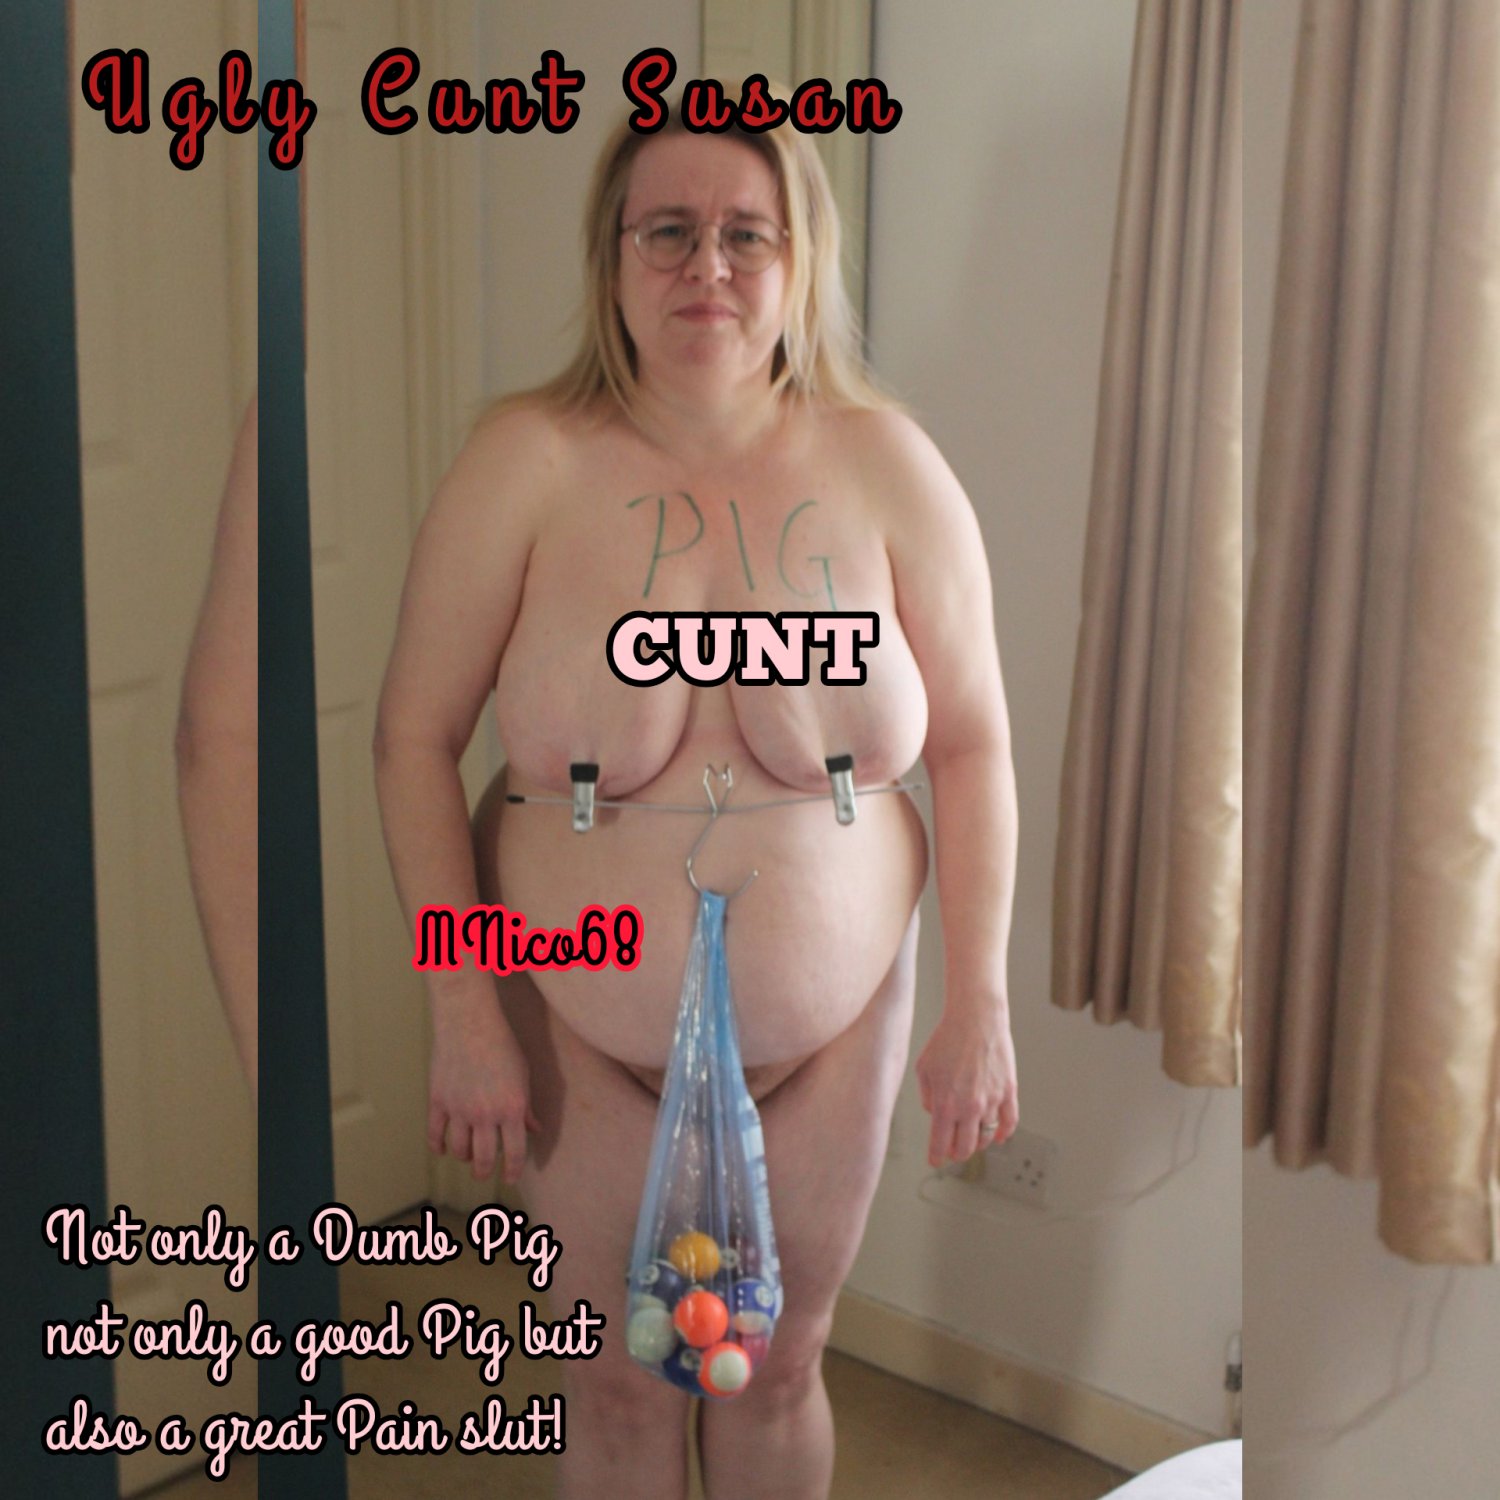 Ugly Cunt Susan, UK Fat Pig to use/abuse/humiliation,comment on... image pic photo